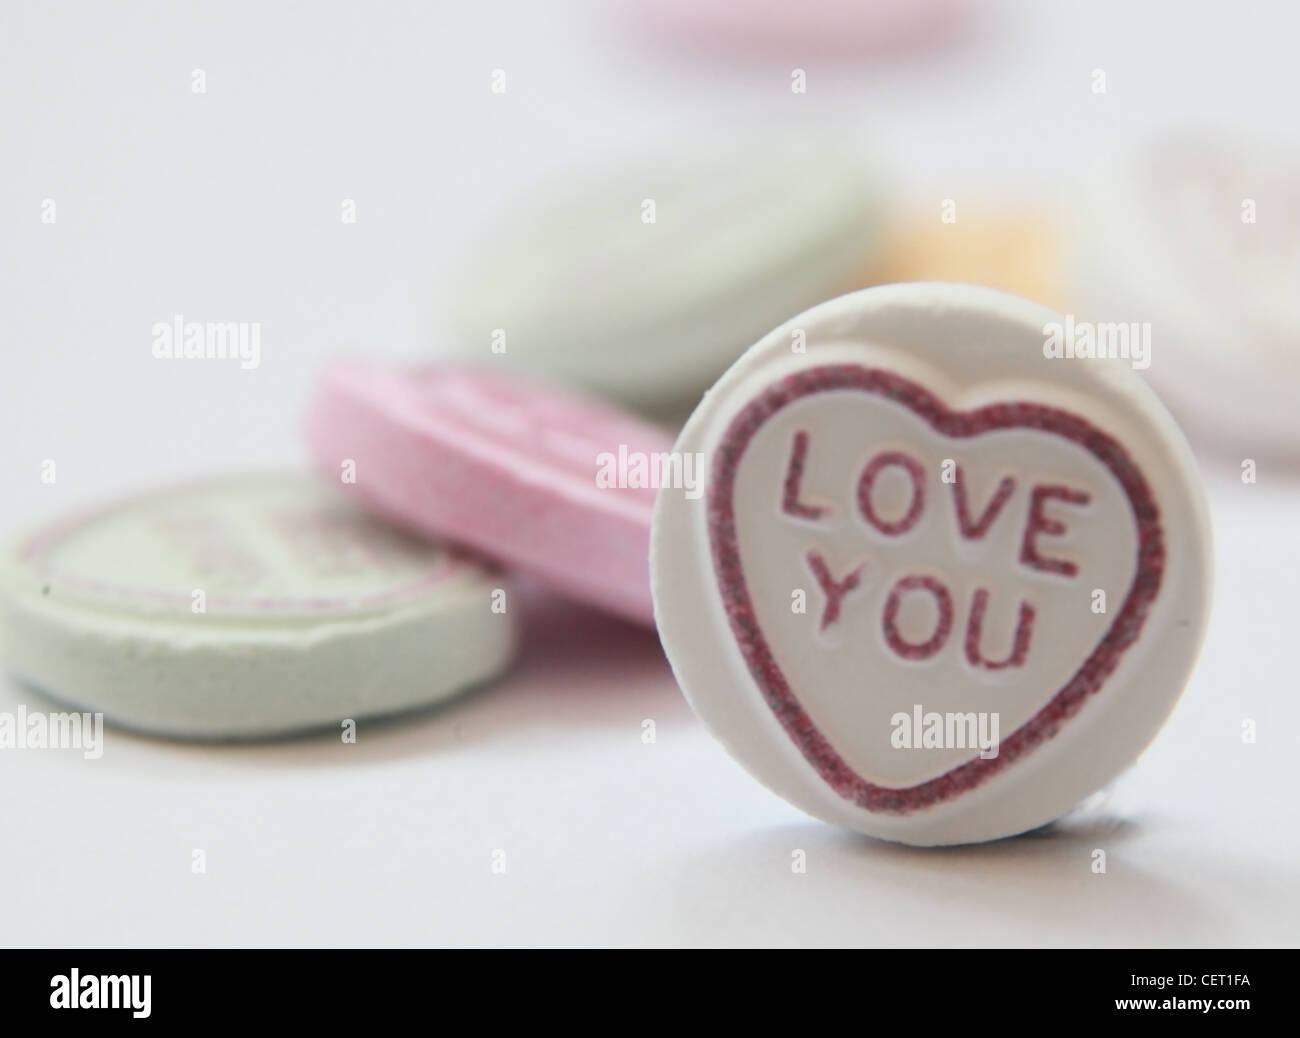 Love hearts, I Love you shallow focus valentines day image Stock Photo